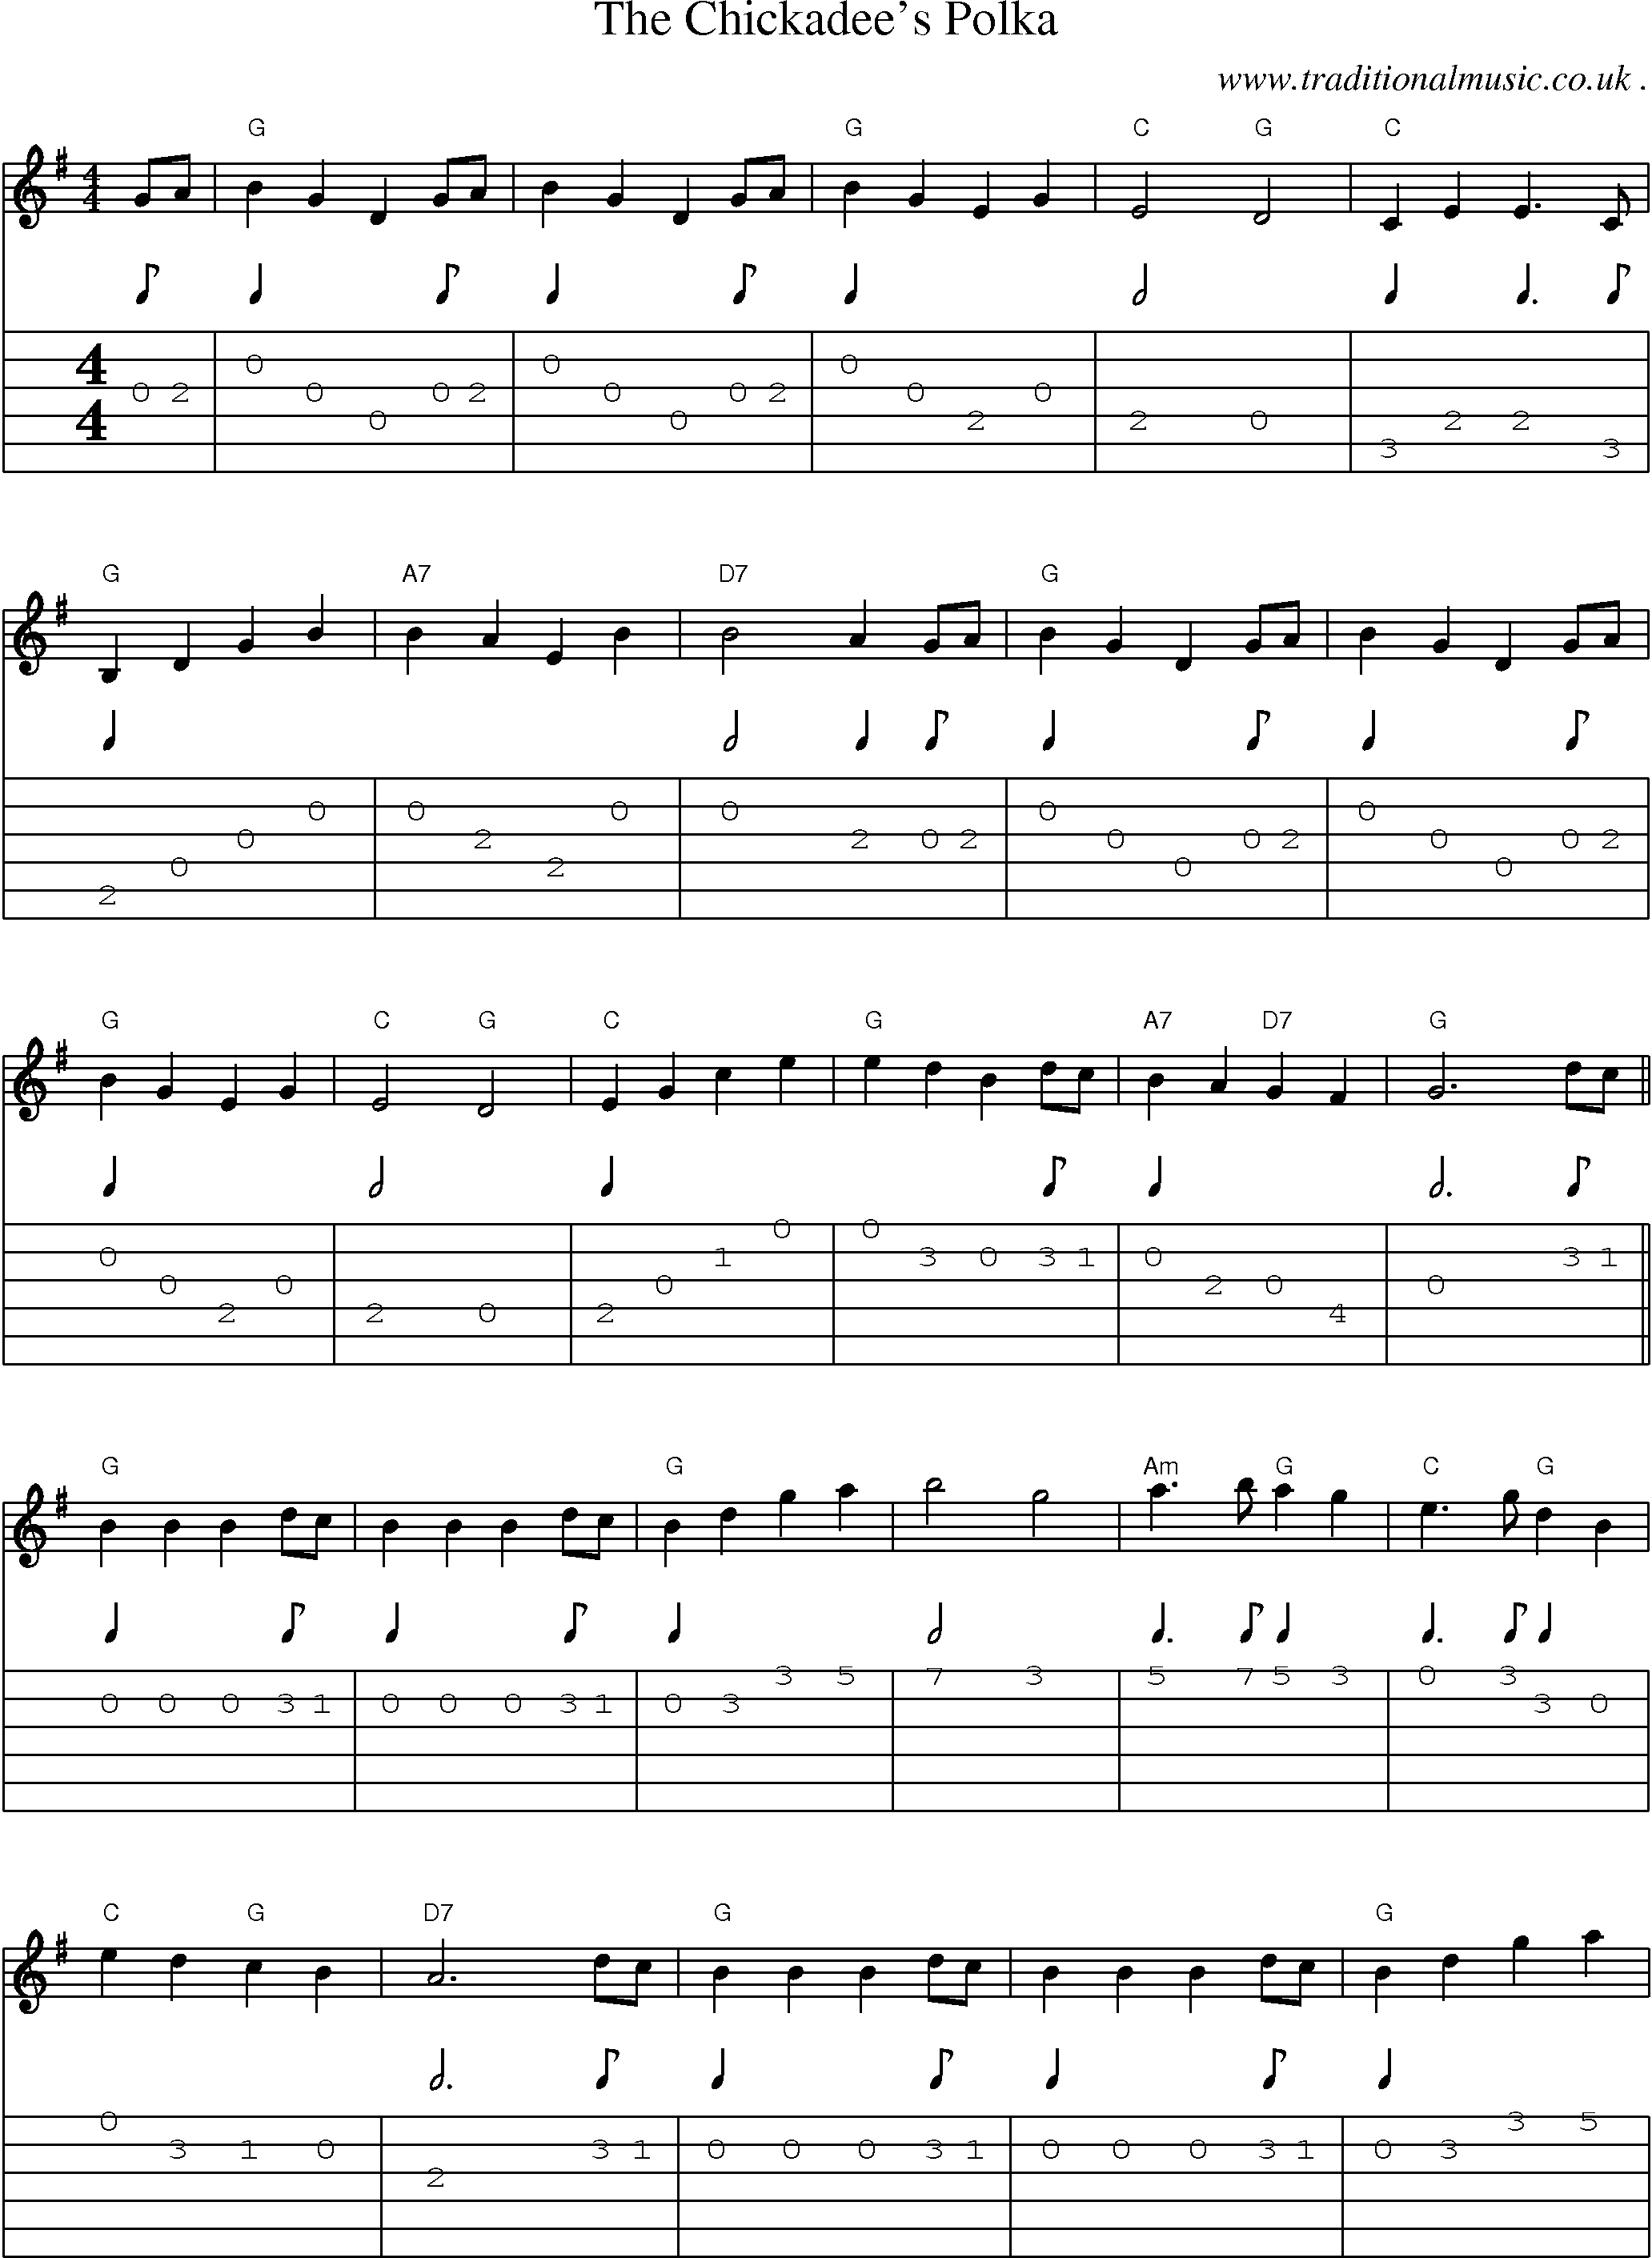 Sheet-Music and Guitar Tabs for The Chickadees Polka